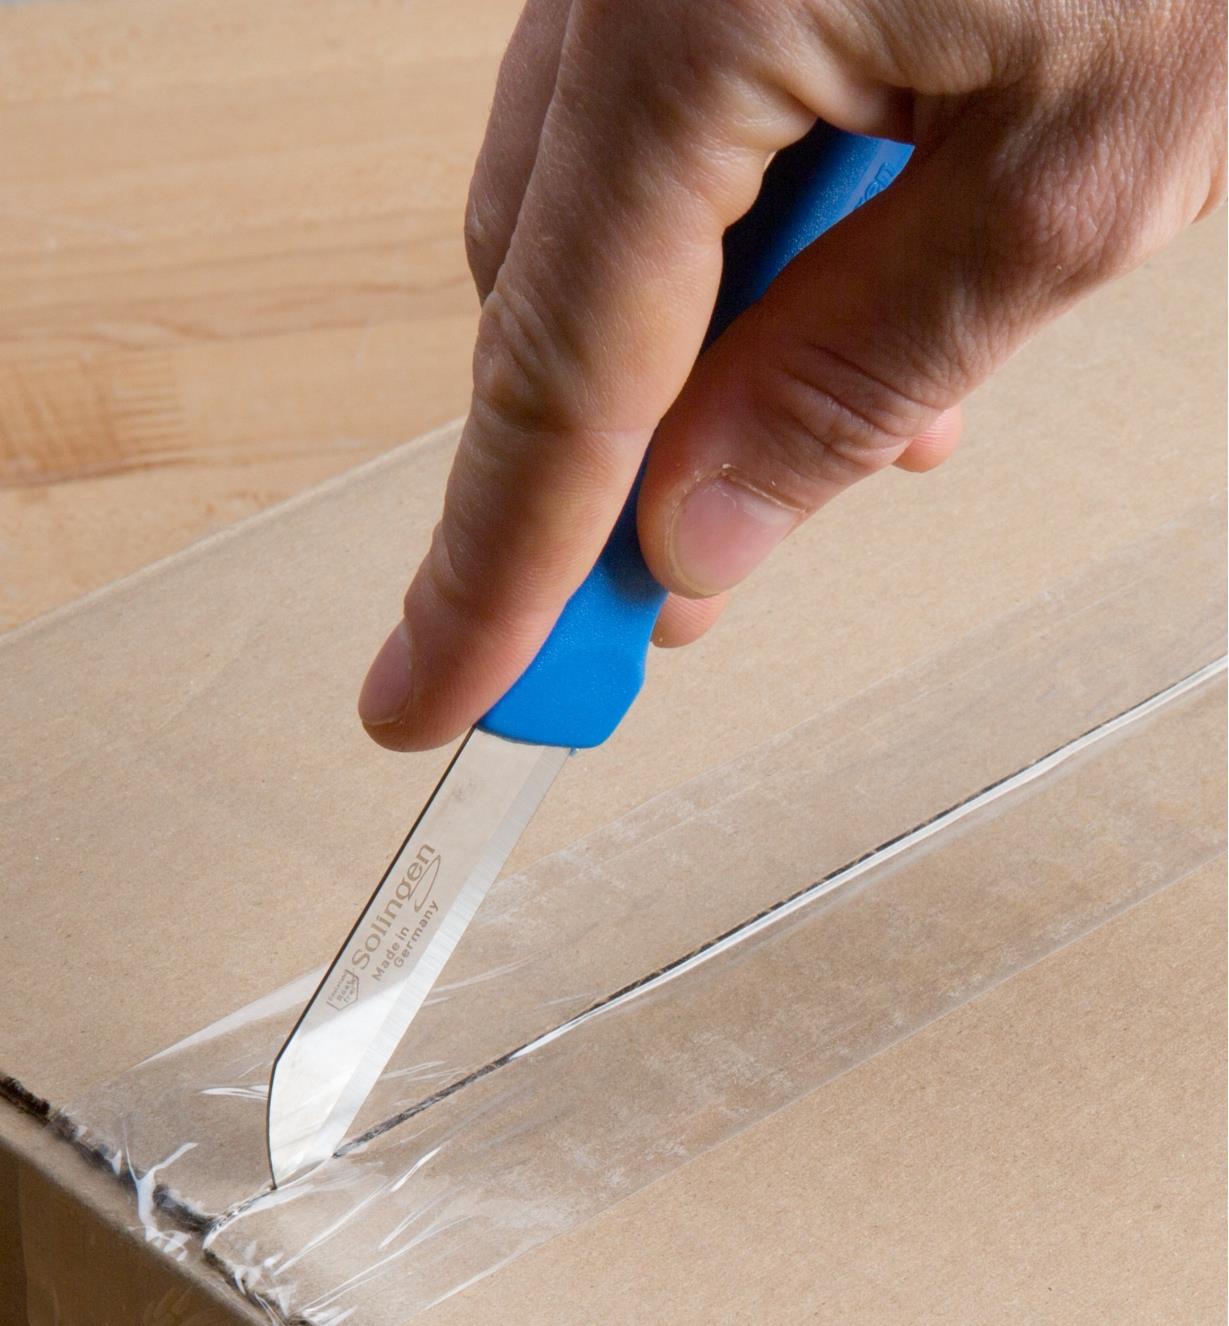 Using a paring knife to cut packing tape on a cardboard box